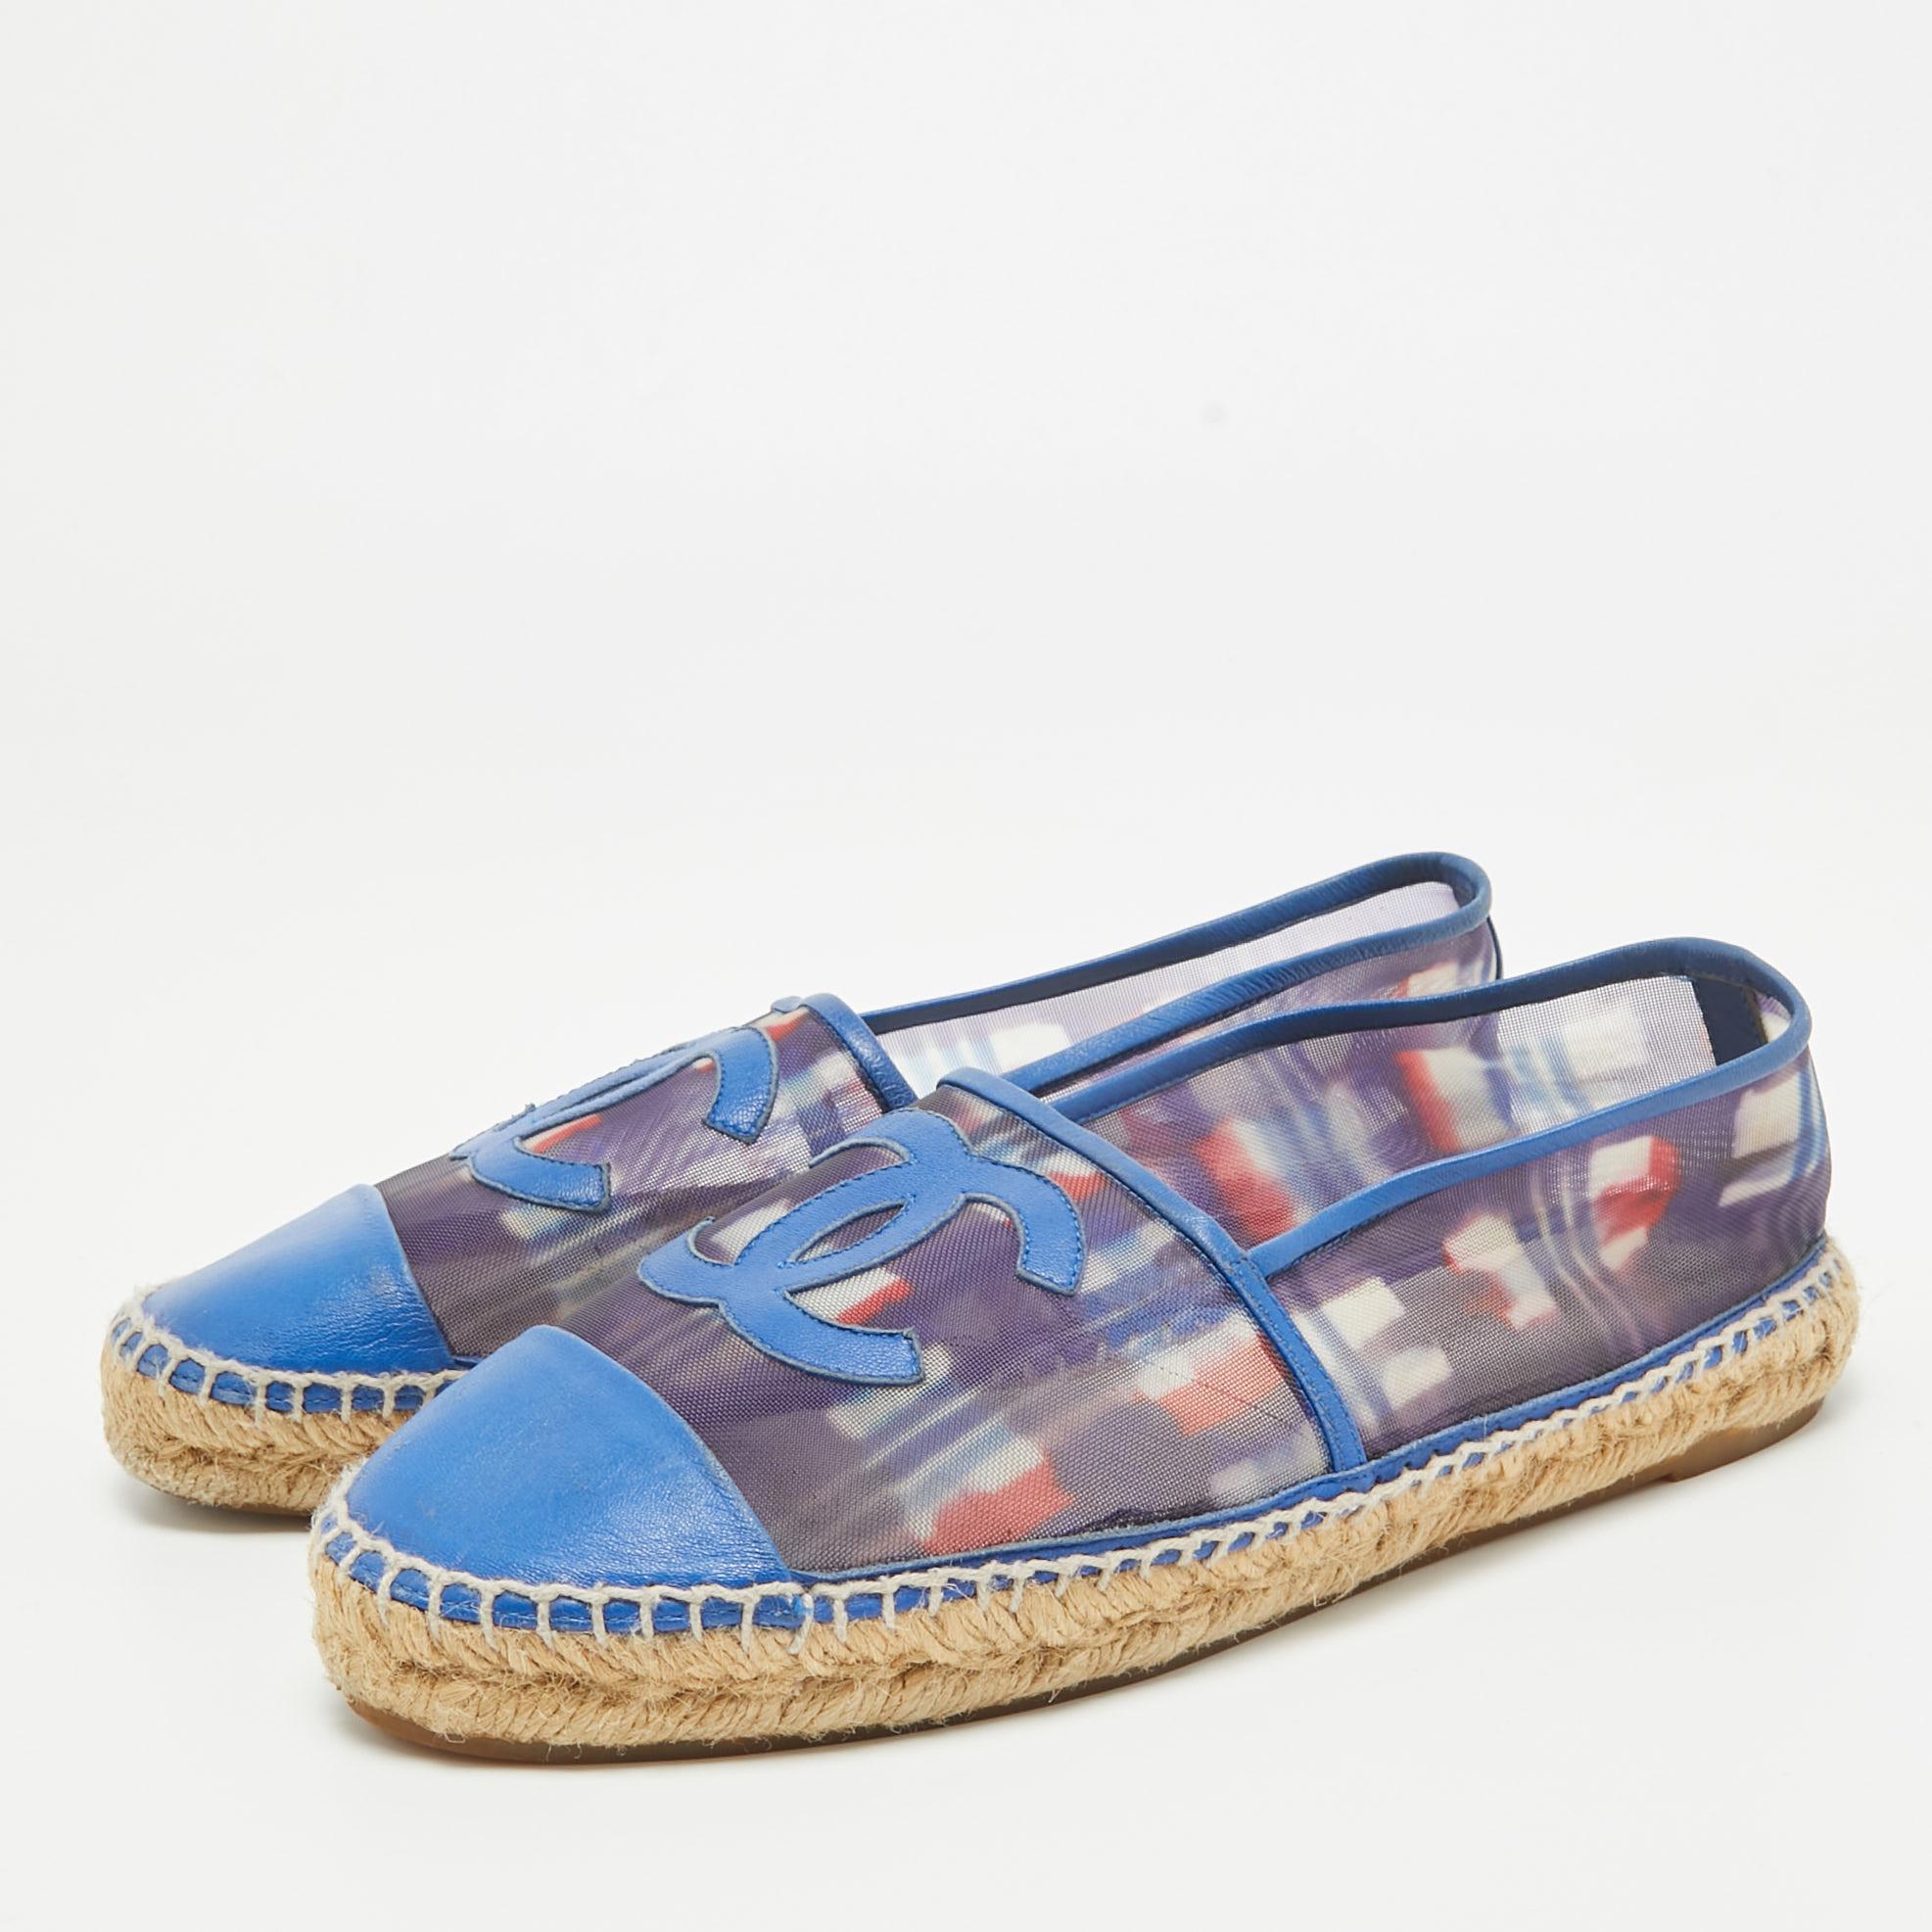 Chanel Blue Printed Mesh and Leather CC Espadrille Flats Size 39 2